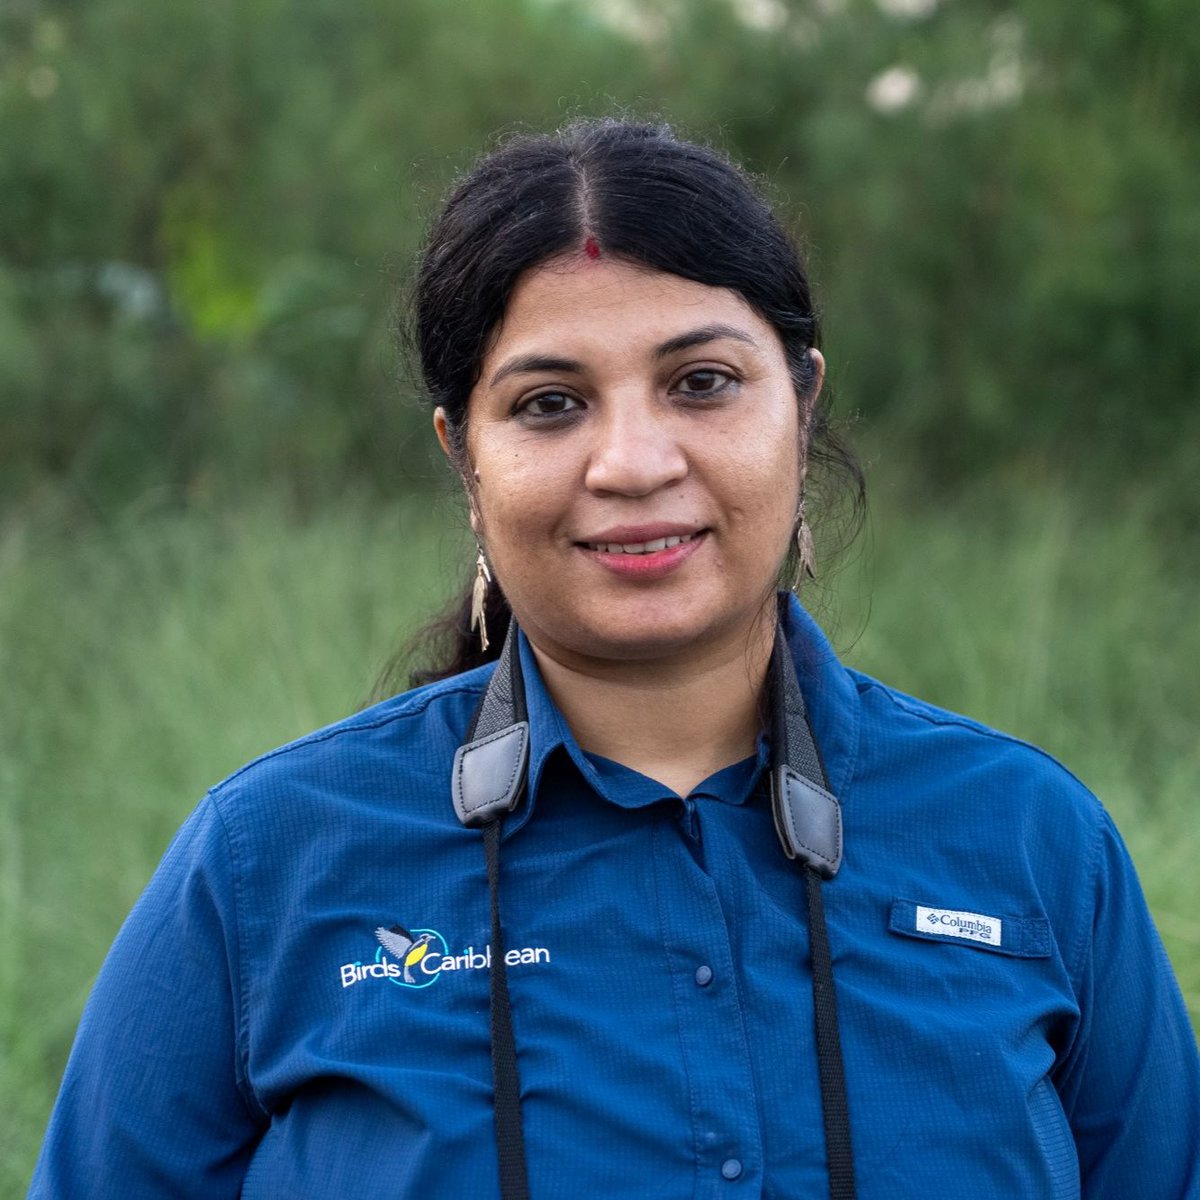 Congratulations to the #WhitleyGoldAward winner: PURNIMA DEVI BARMAN! @Aaranyak 🇮🇳 India 🪶 Greater Adjutant Stork 🏆 #WhitleyGoldAward donated by the Friends of WFN Find out more about her project here: ow.ly/z8I550Ri0jh #SharedFuture